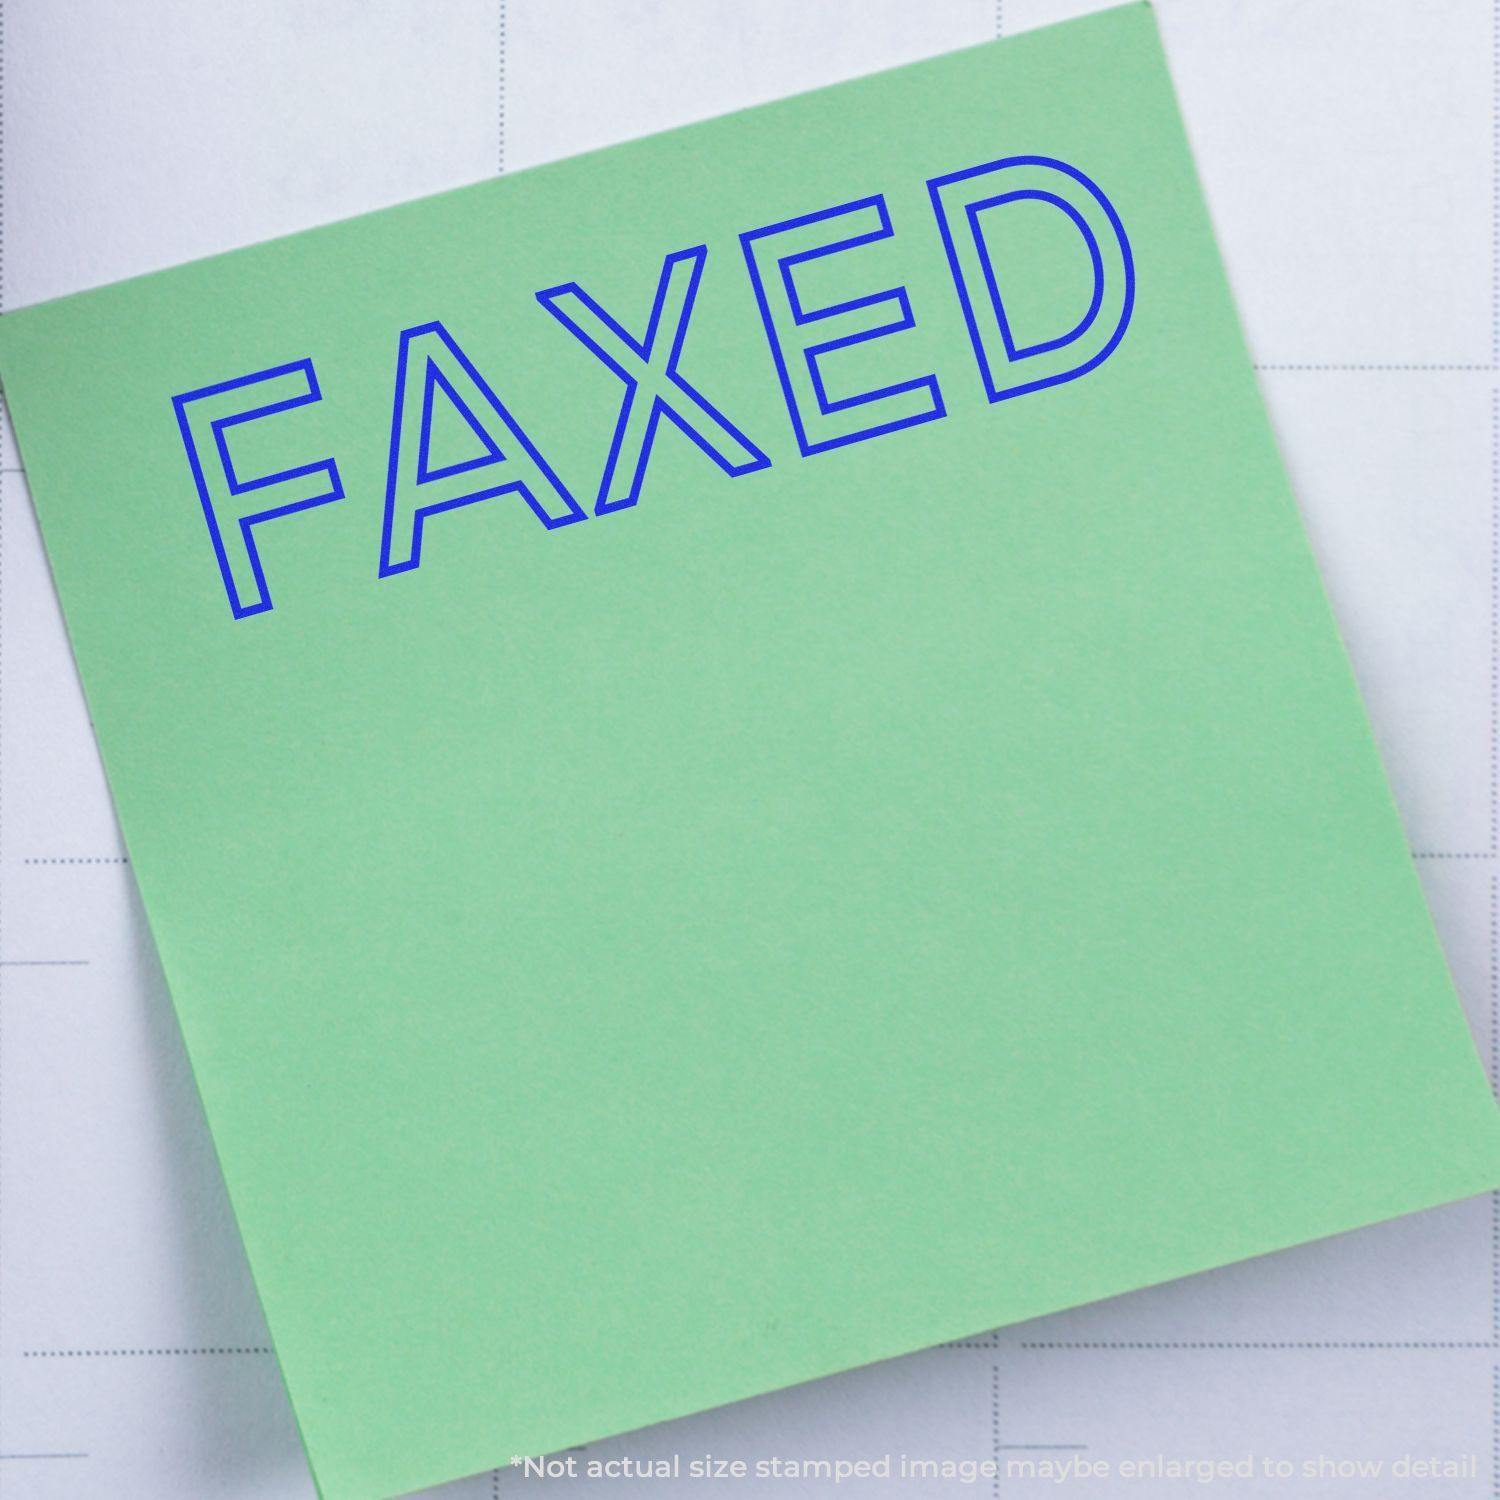 A stock office pre-inked stamp with a stamped image showing how the text "FAXED" in an outline font is displayed after stamping.